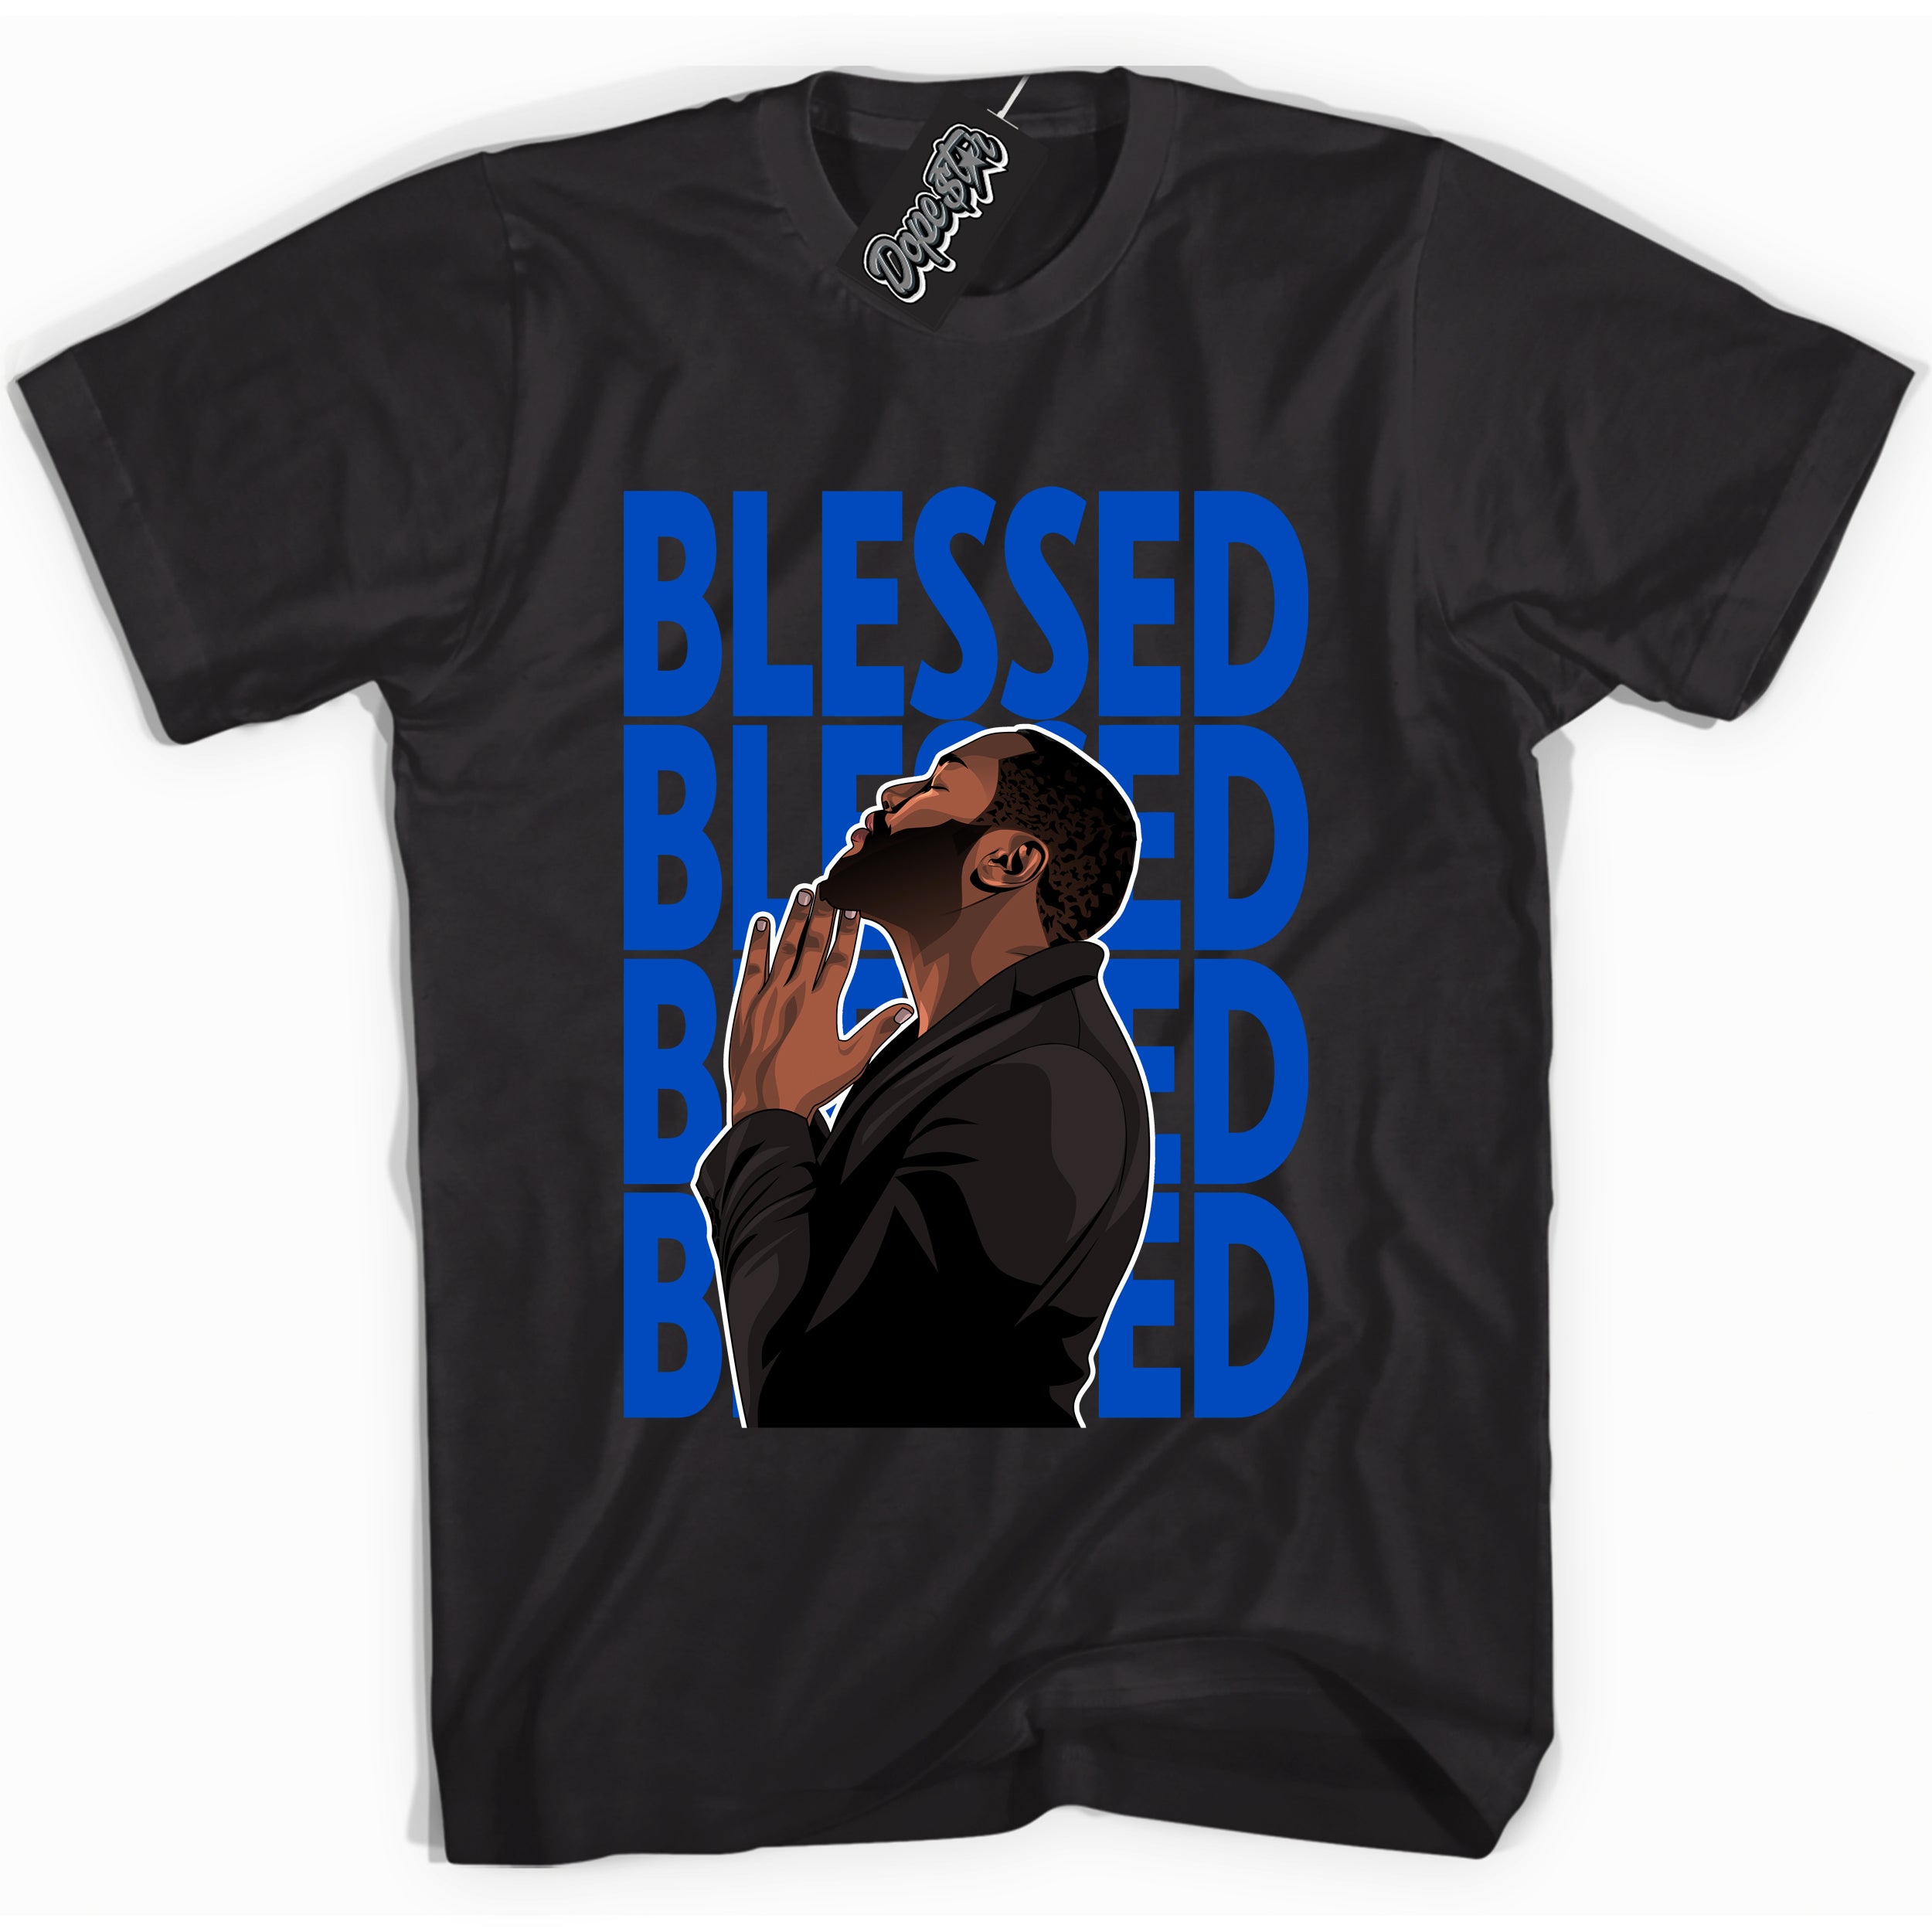 Cool Black graphic tee with God Blessed print, that perfectly matches OG Royal Reimagined 1s sneakers 